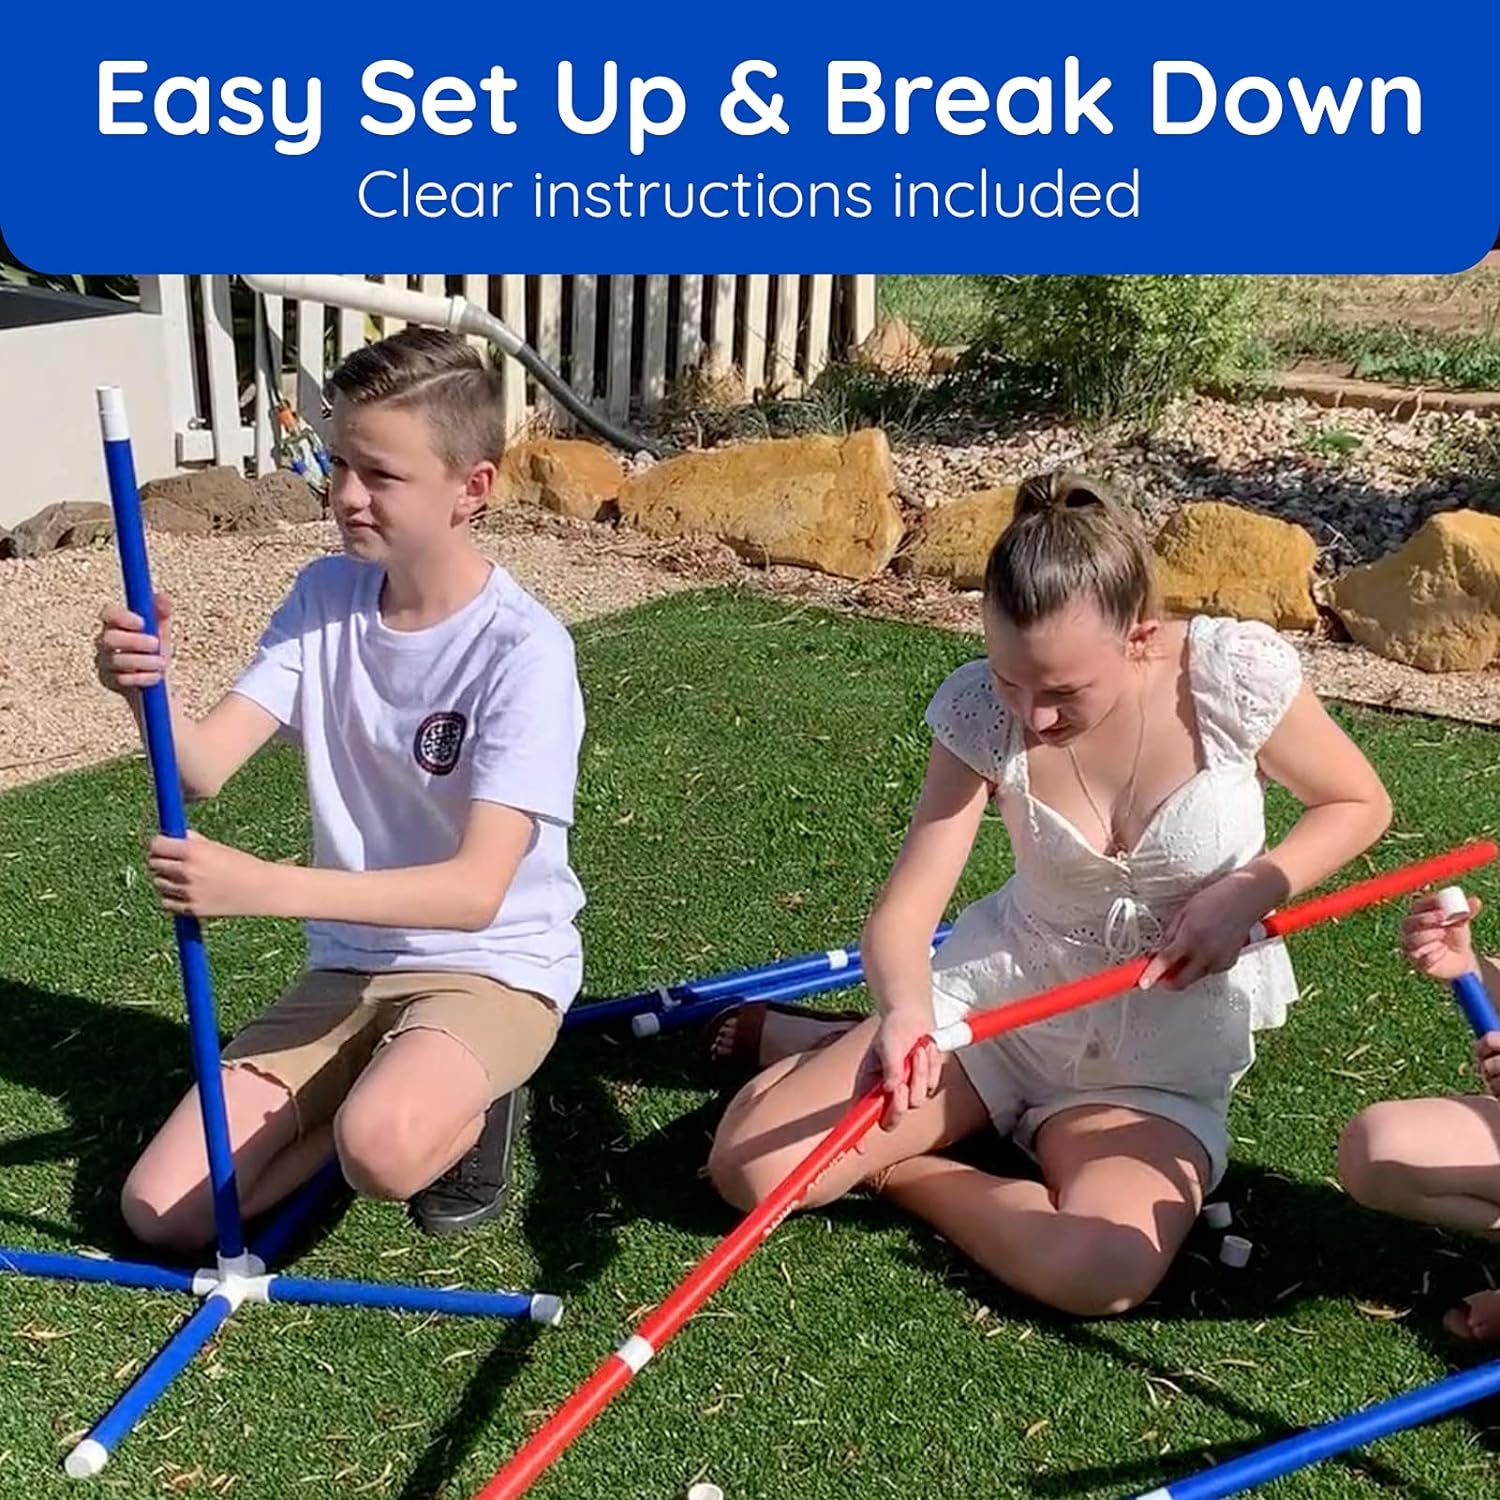 Limbo Game for Adults and Family - Indoor Holiday Fun, Backyard Games, Lawn Games or Outdoor Party Games for Kids - Easy to Set up and Play Anywhere, Easter Basket Stuffers Gifts